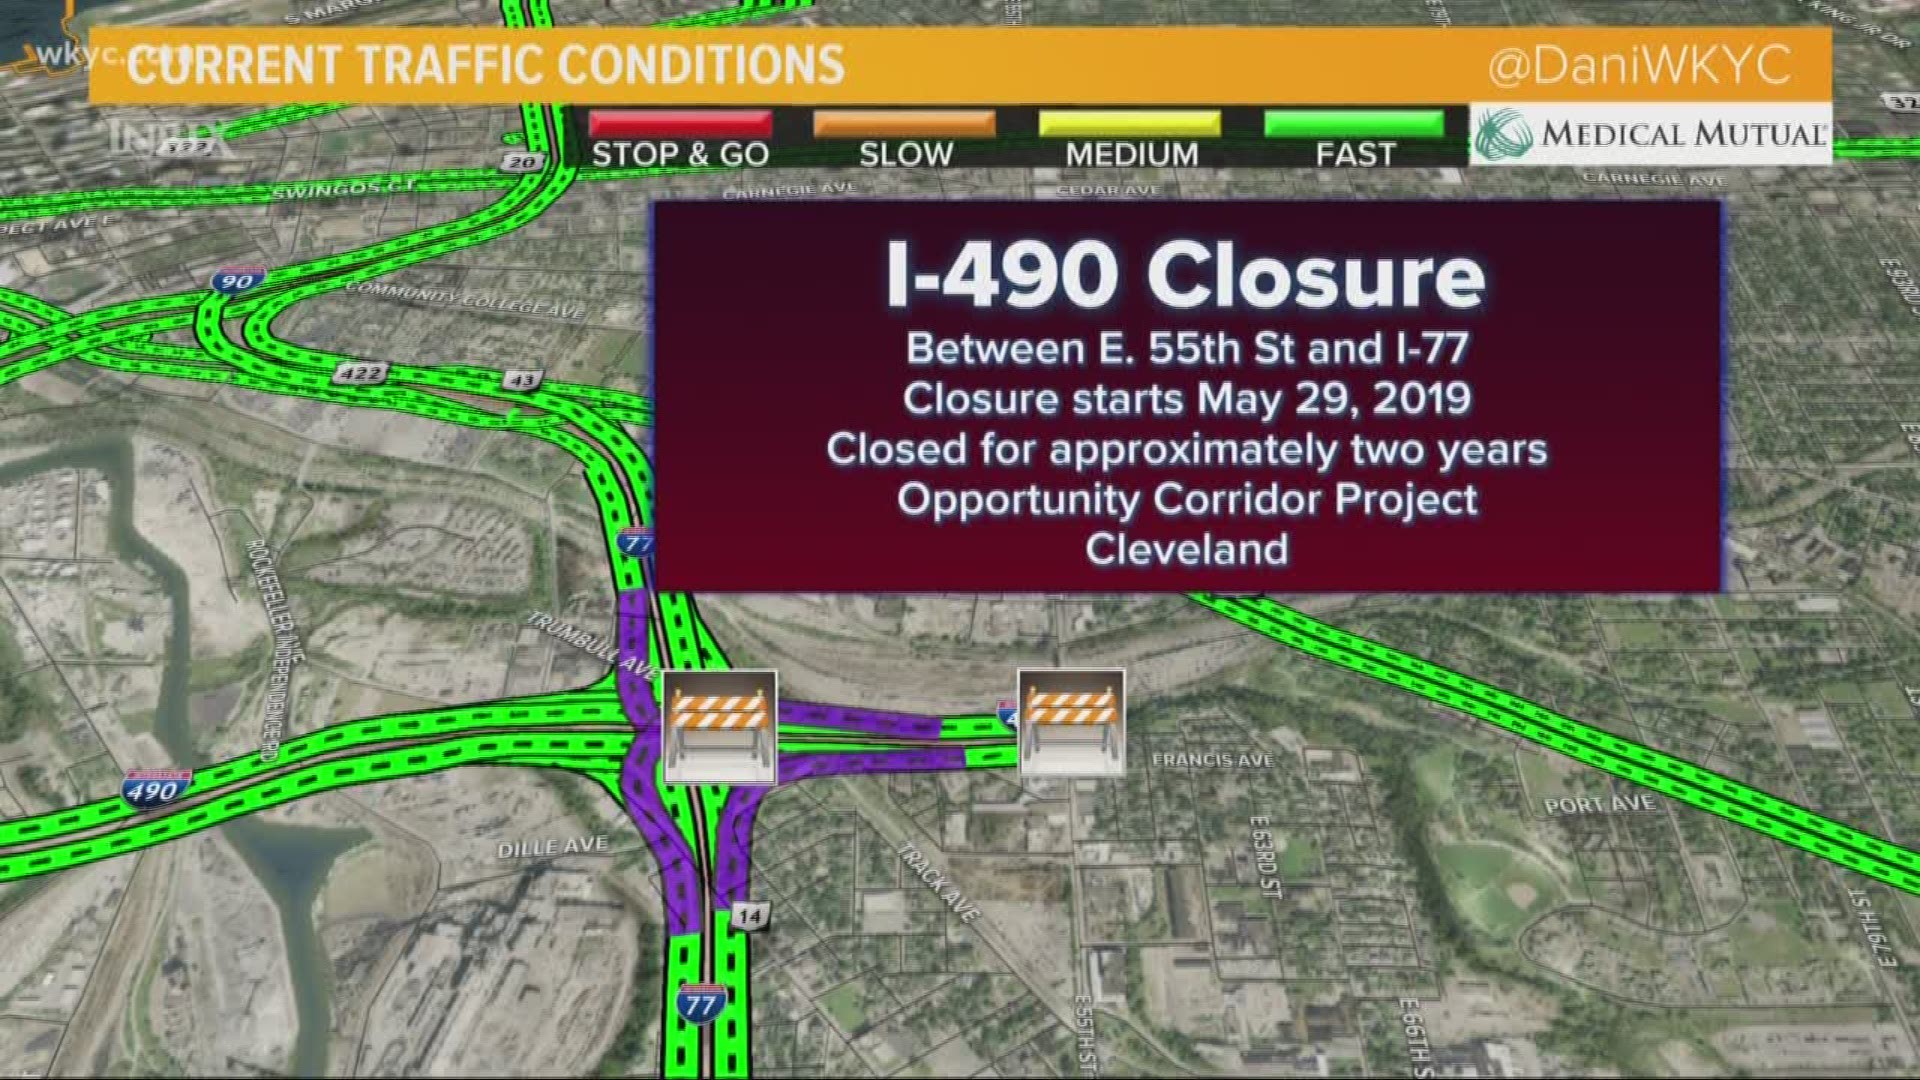 May 29, 2019: It's a construction project years in the making. I-490 will be closed between E. 55th Street and I-77 from May 29, 2019, until May 2021 as construction crews work on 'Section 3' of the Opportunity Corridor Project.